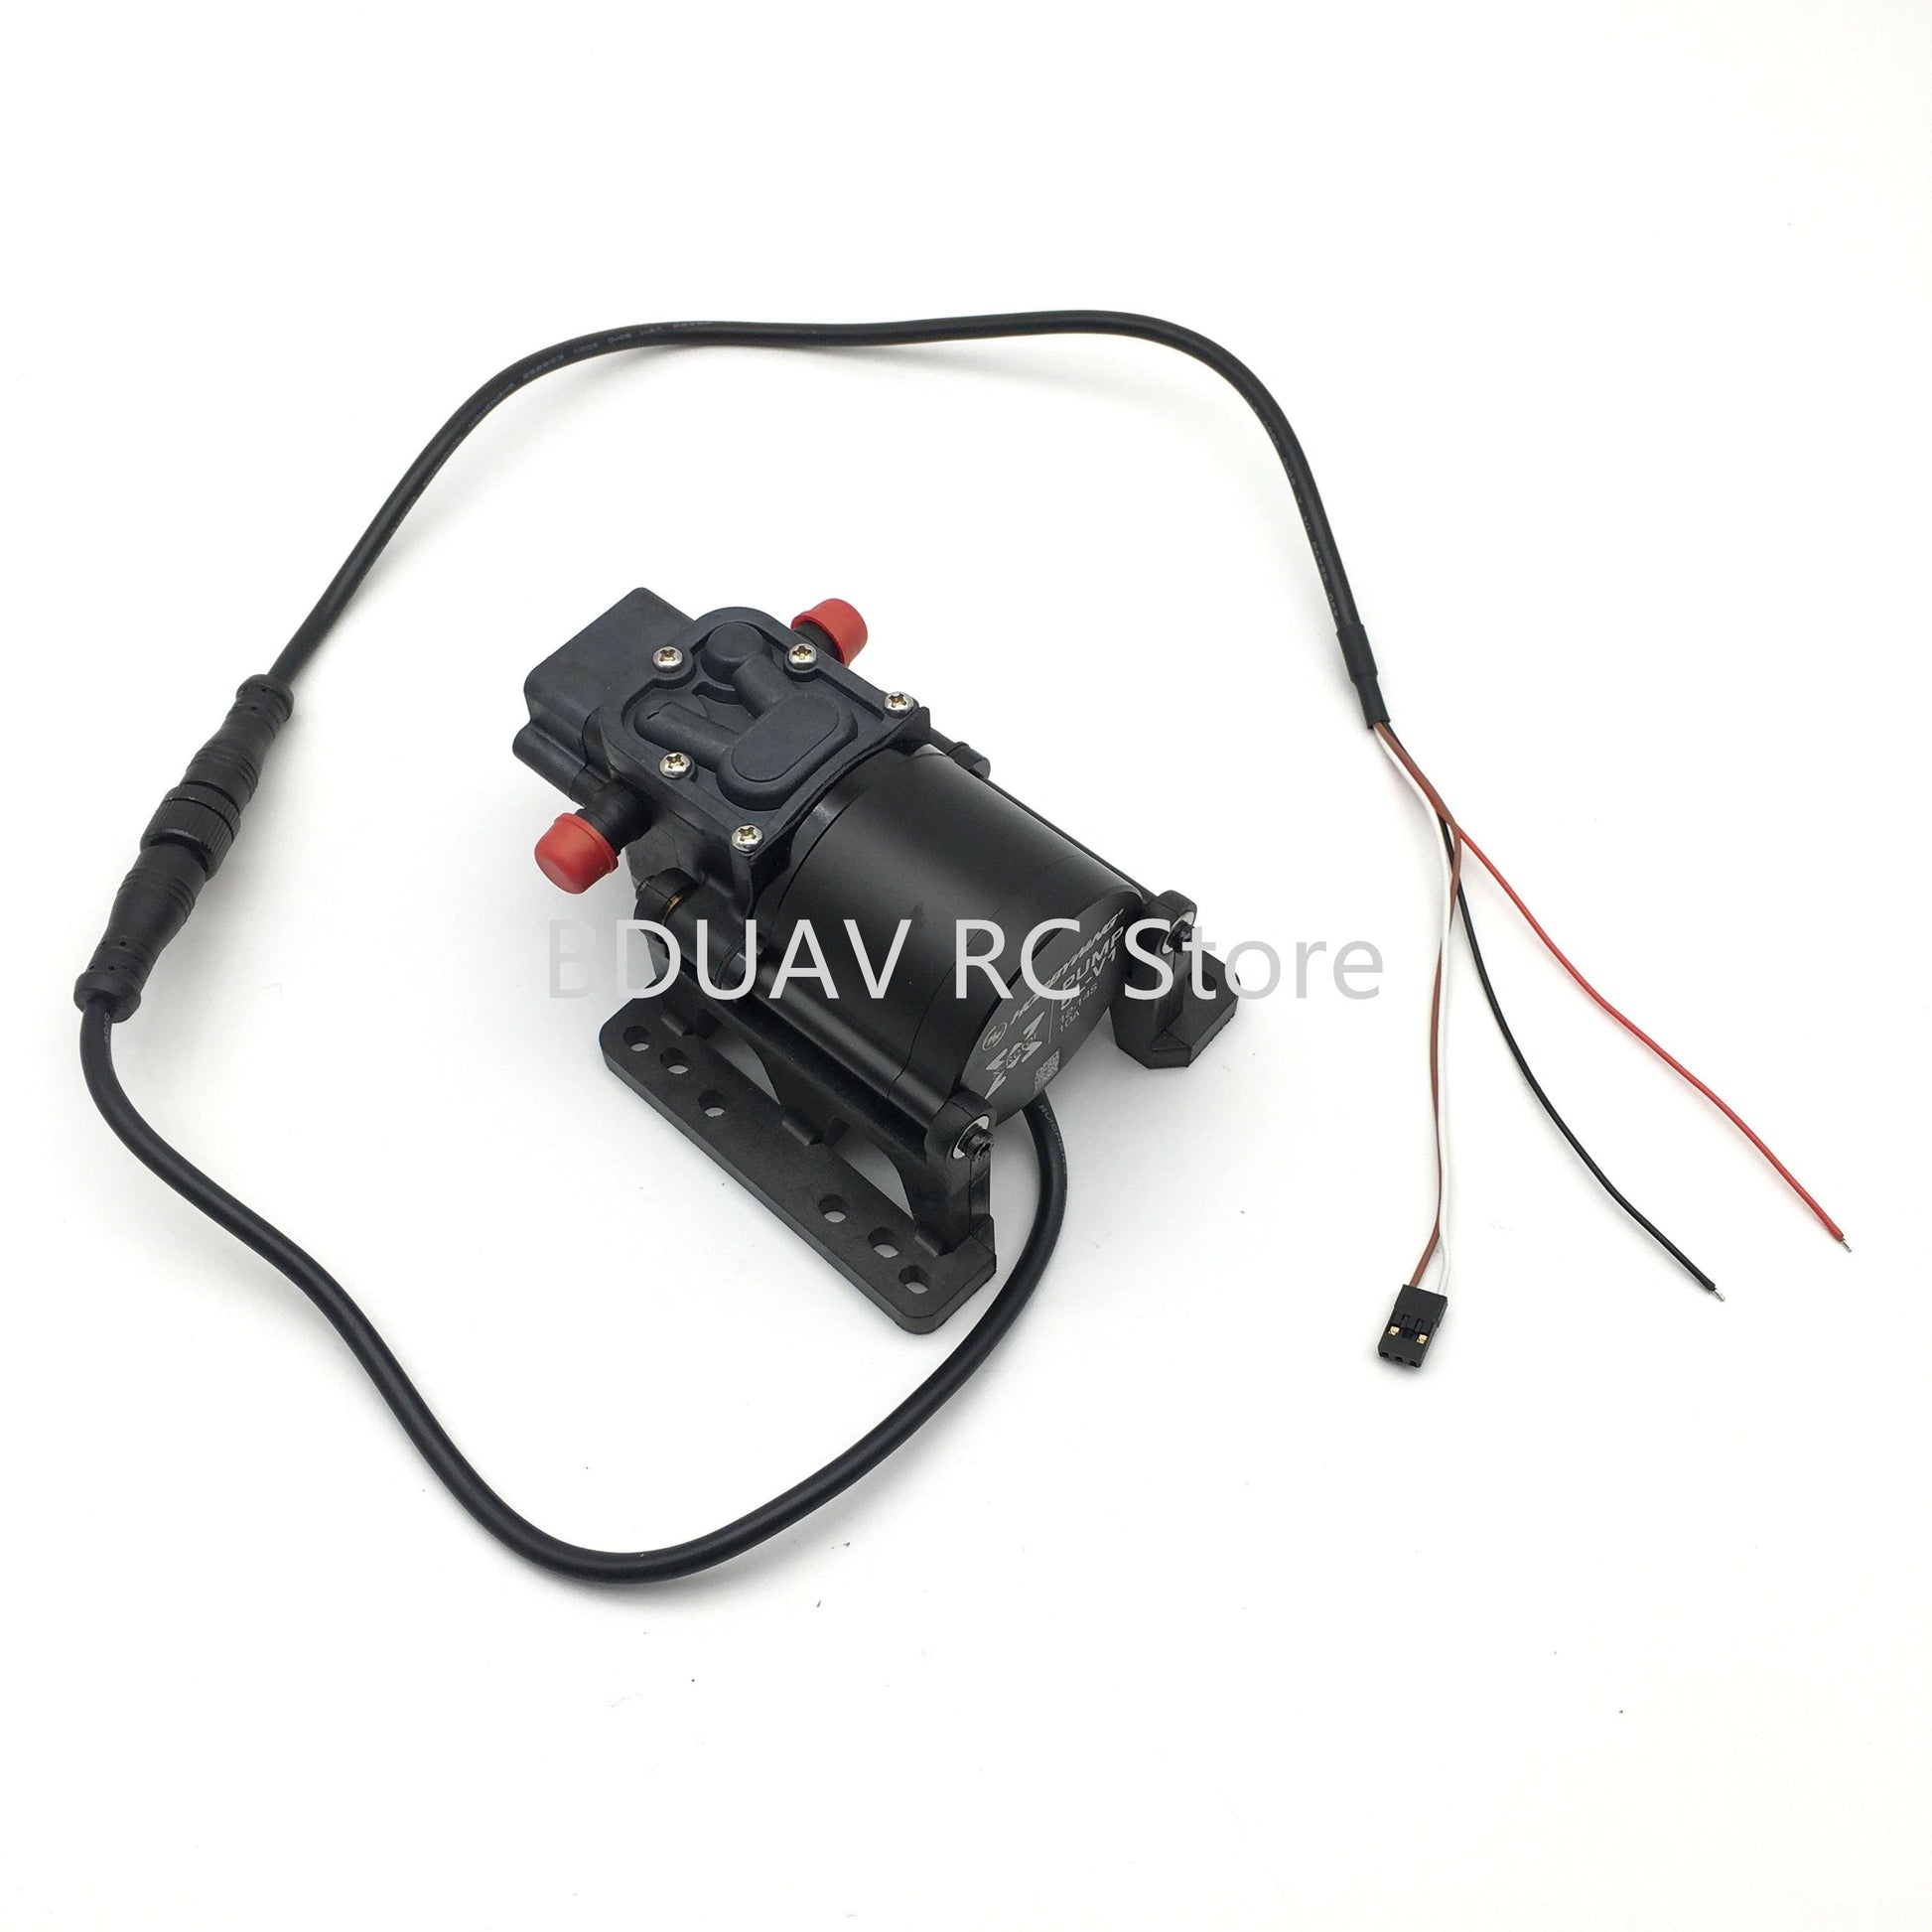 Hobbywing 5L Water Pump - Brushless Combo Pump 10A 12S 14S V1 Sprayer Diaphragm Pump for Plant Agriculture Drone UAV - RCDrone